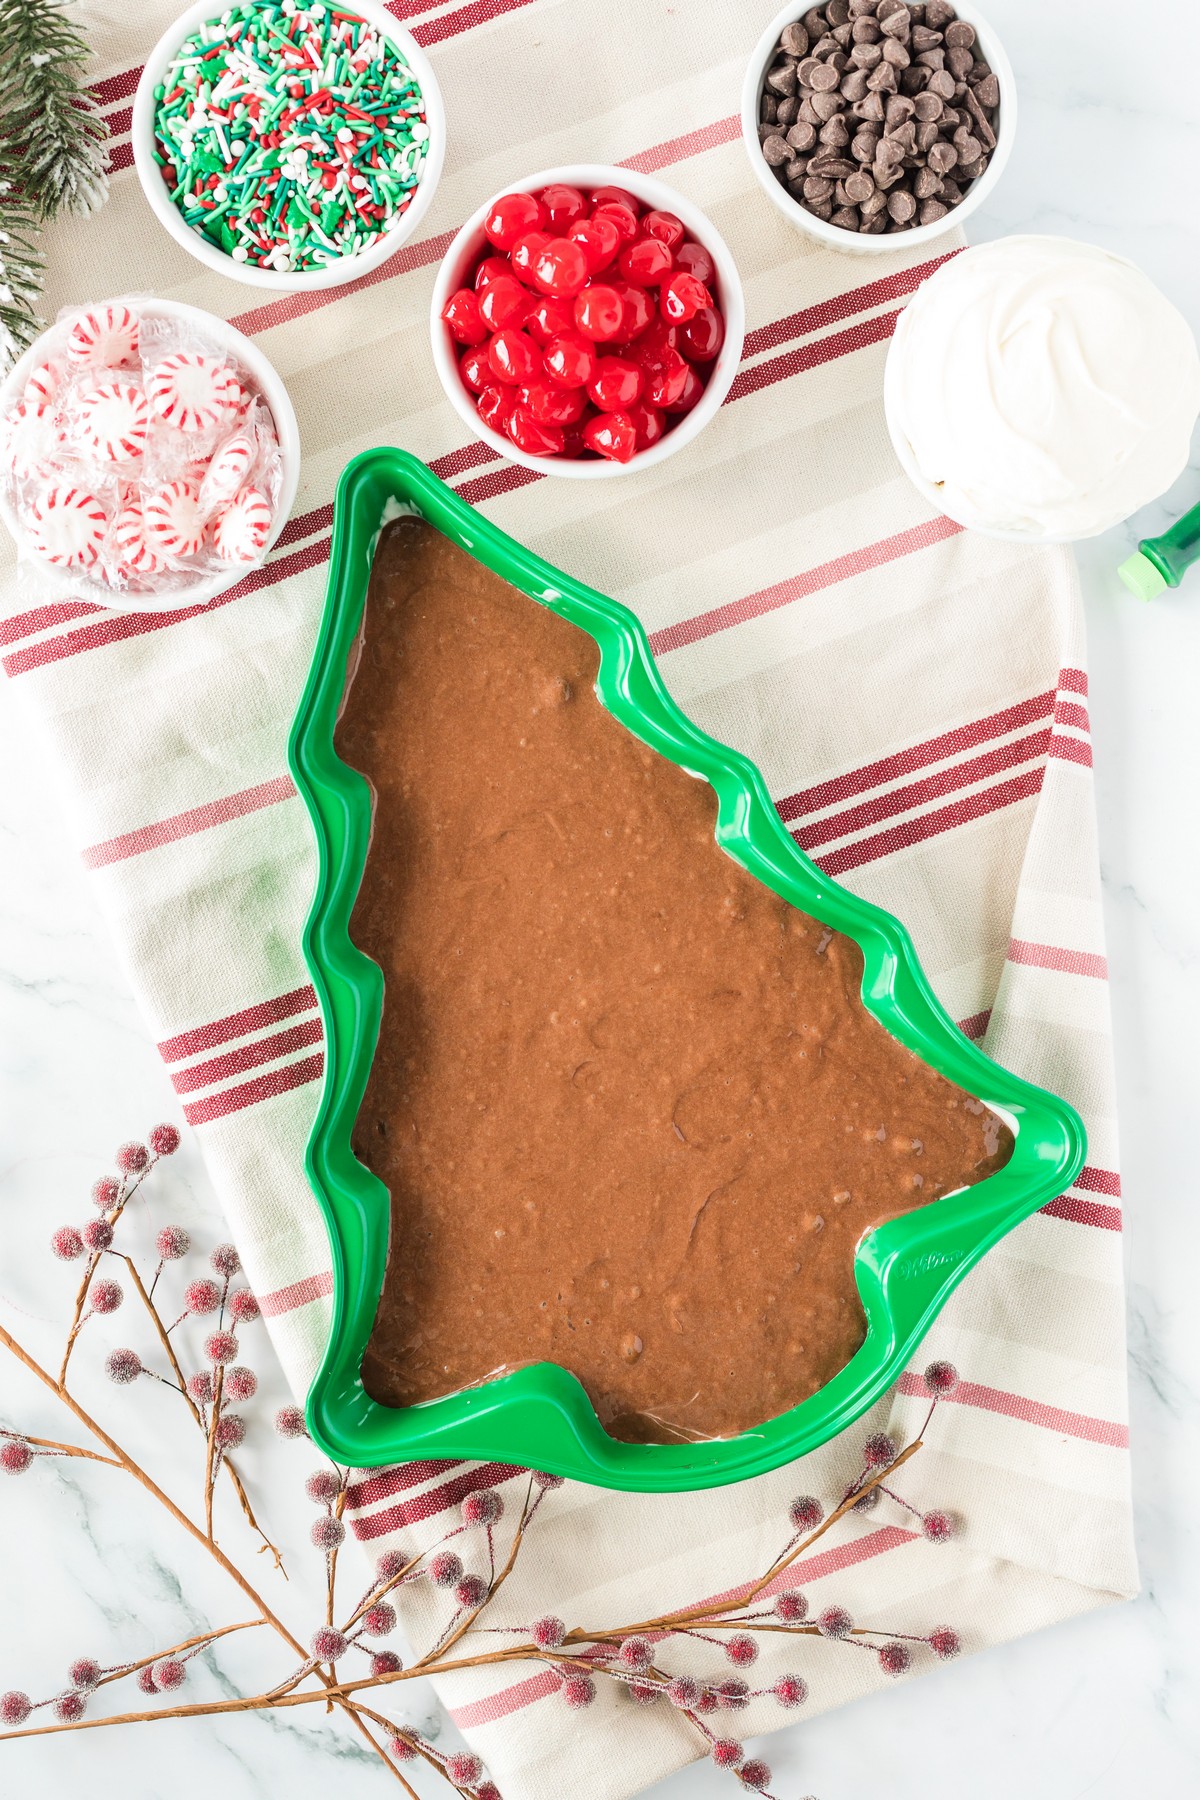 unbaked christmas tree mold with cake batter